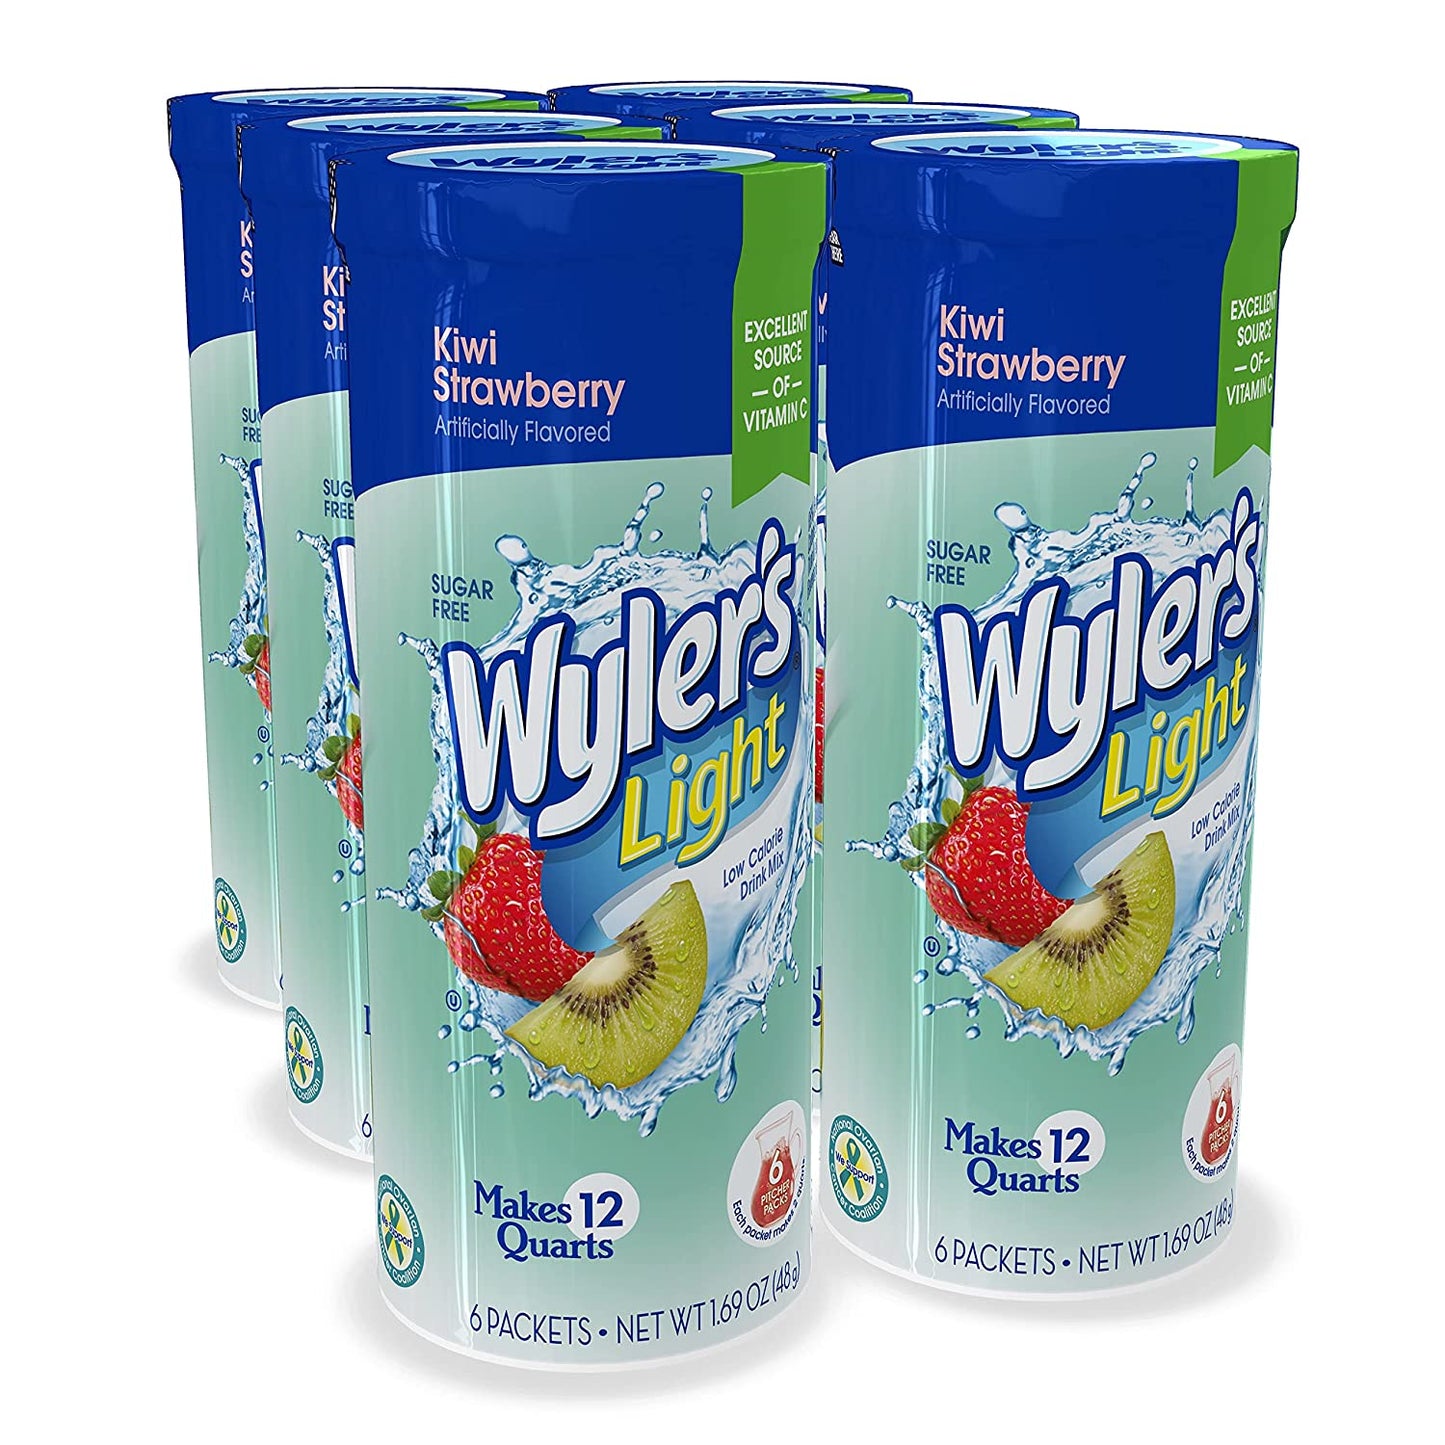 Wyler's Light Canister Drink Mix - Kiwi Strawberry Water Powder Enhancer Canister (6 Canisters that make 12 Quarts Each)